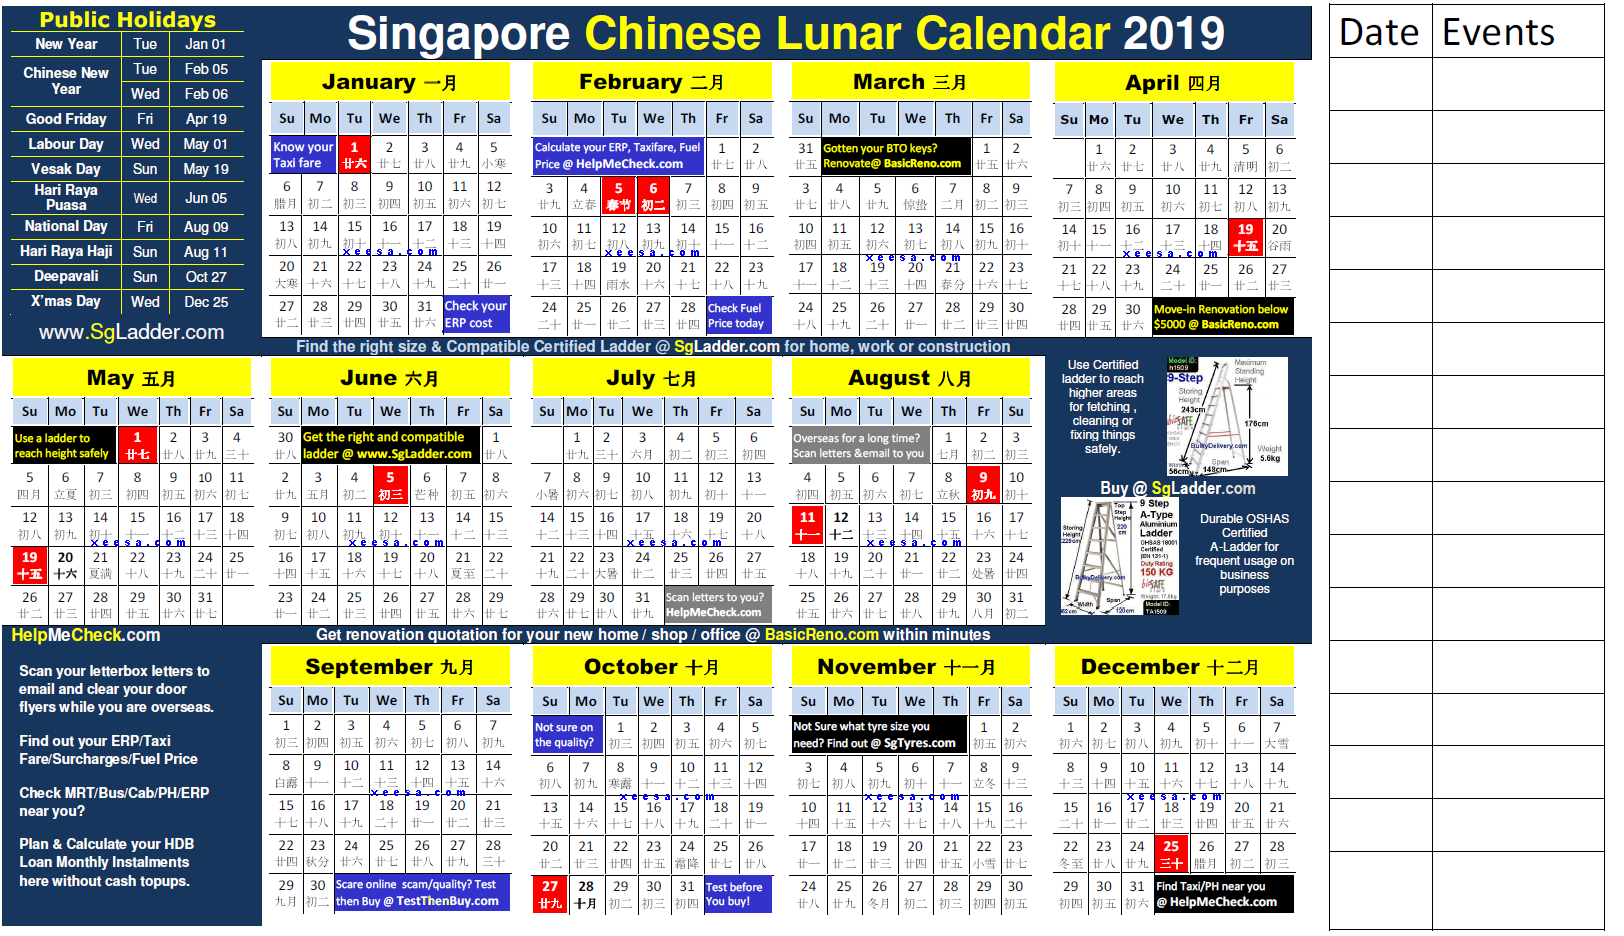 Chinese Lunar Calendar 2019 Free for Singapore - chinese all about